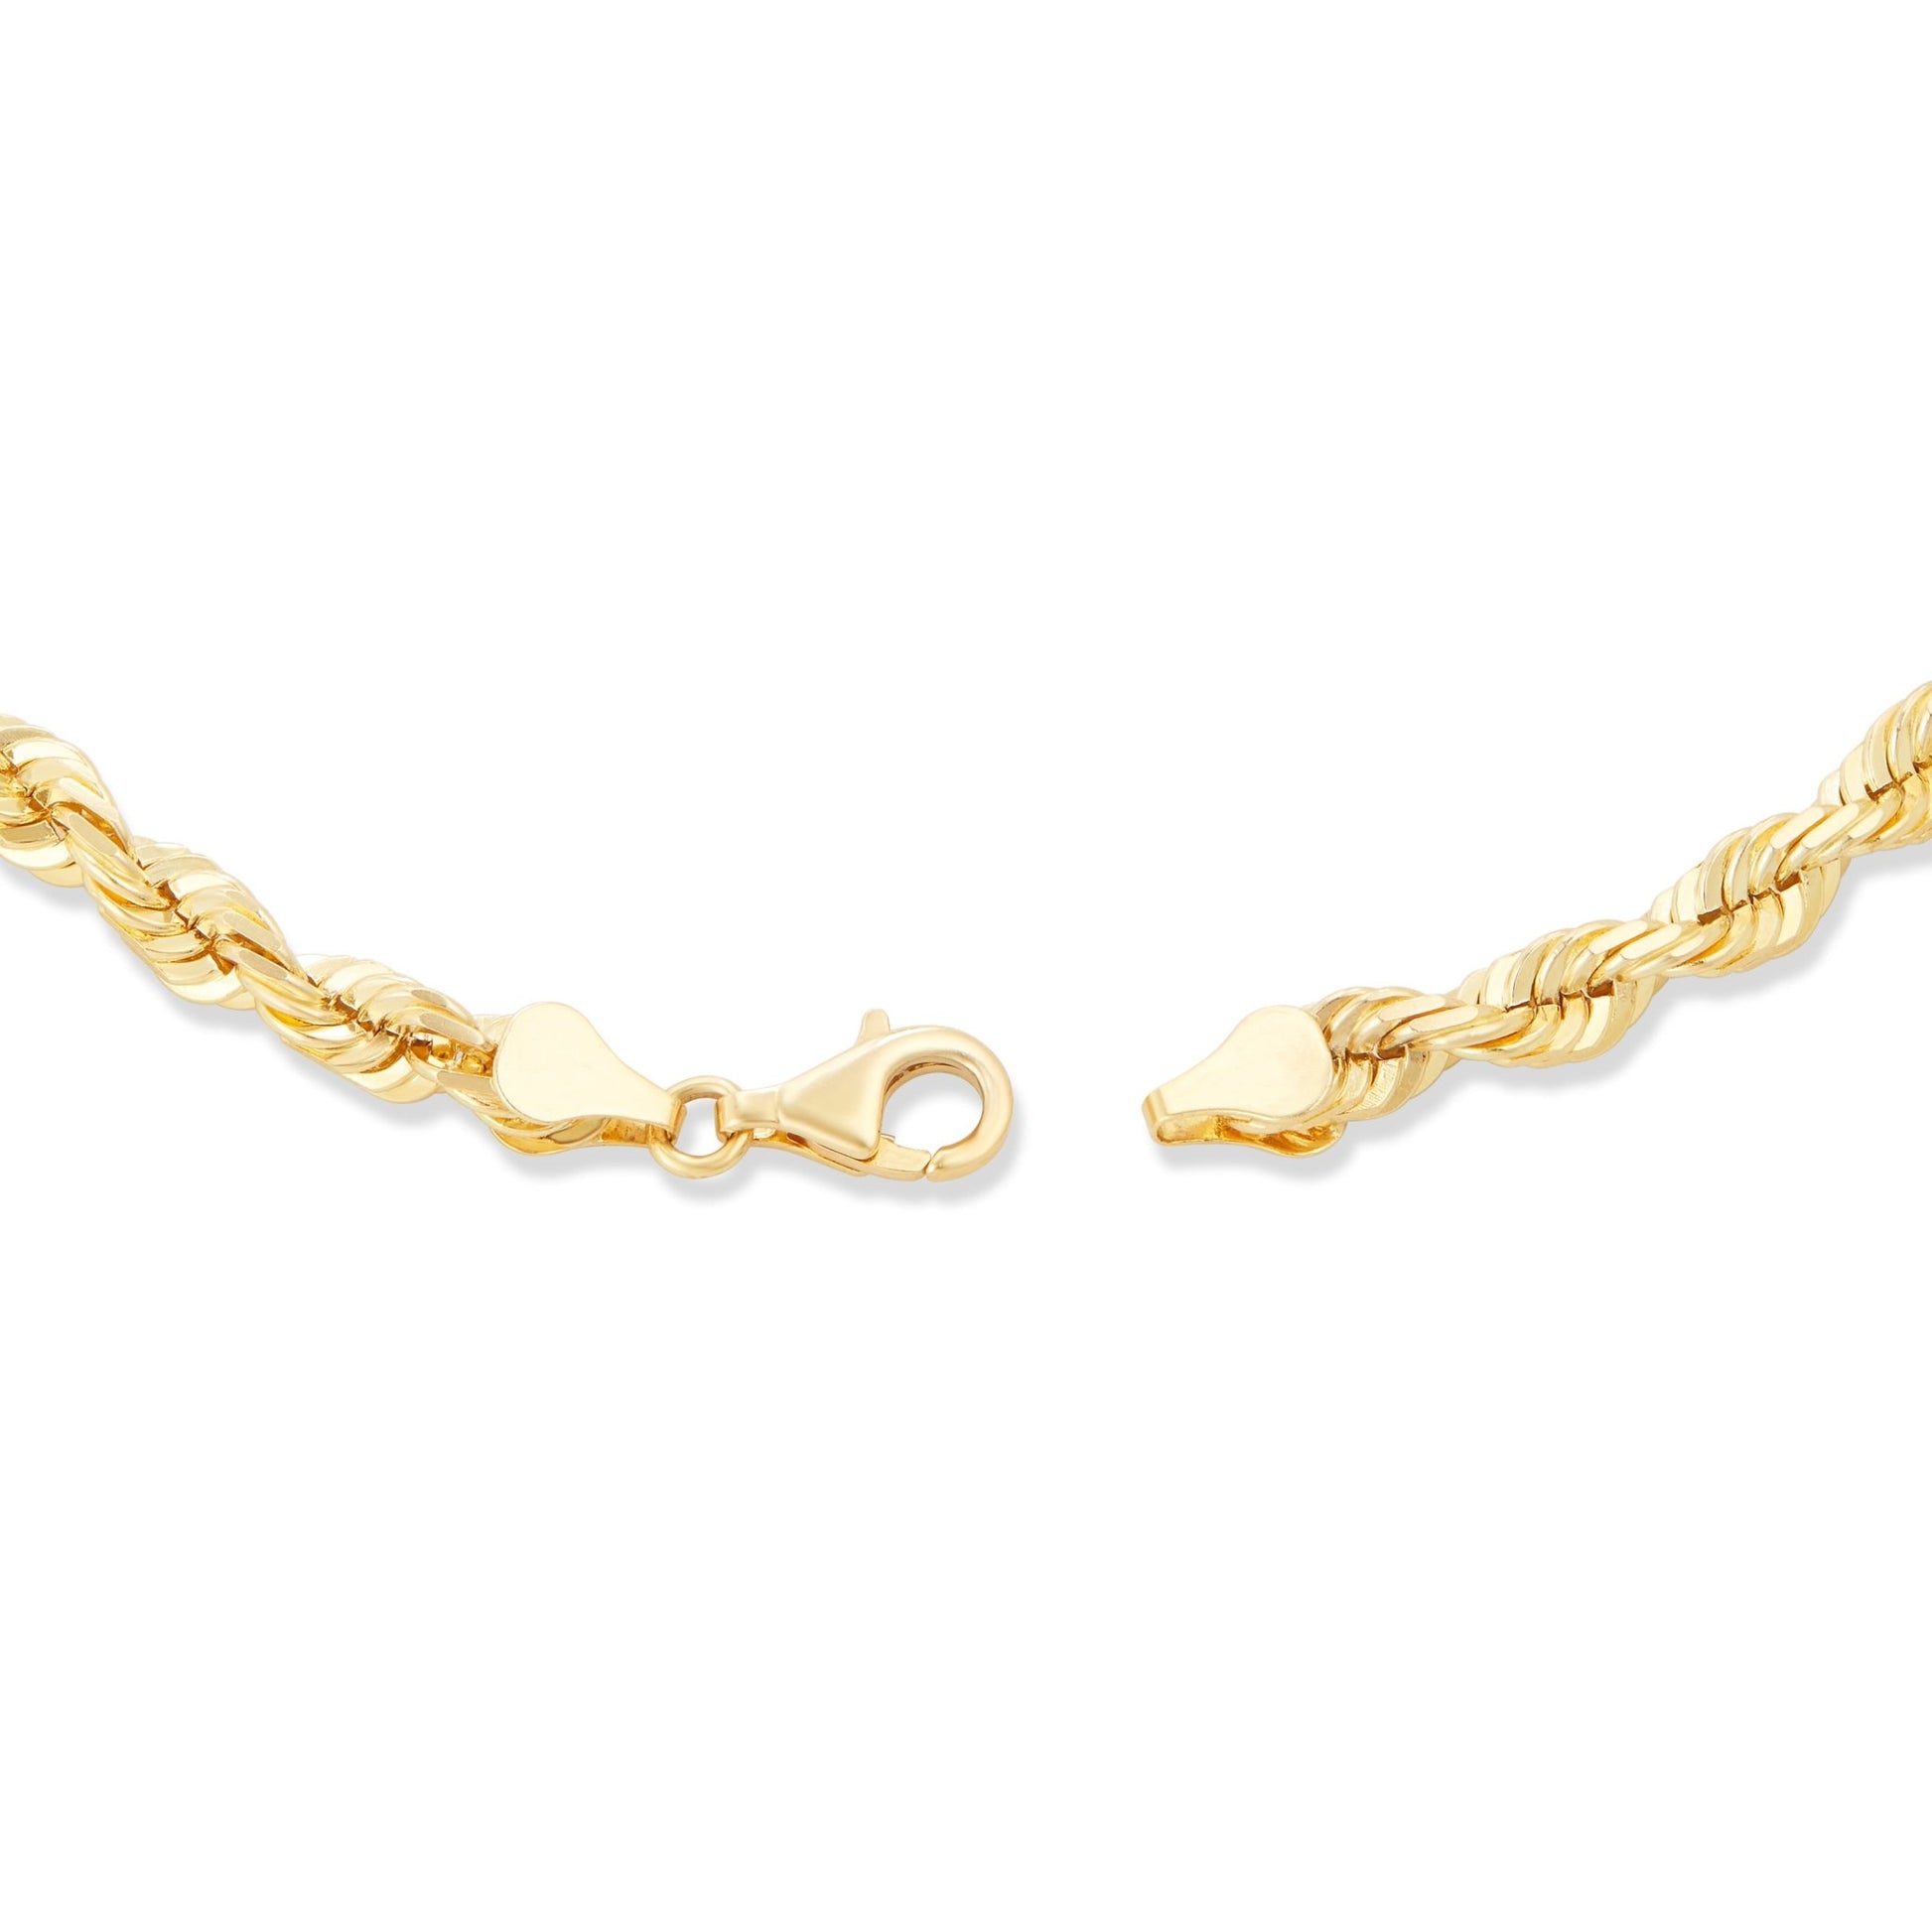 5mm Diamond Cut Franco Chain, 18K Gold Chain Men’s Solid Gold Necklace 24 Inches / Luxury Lobster Clasp